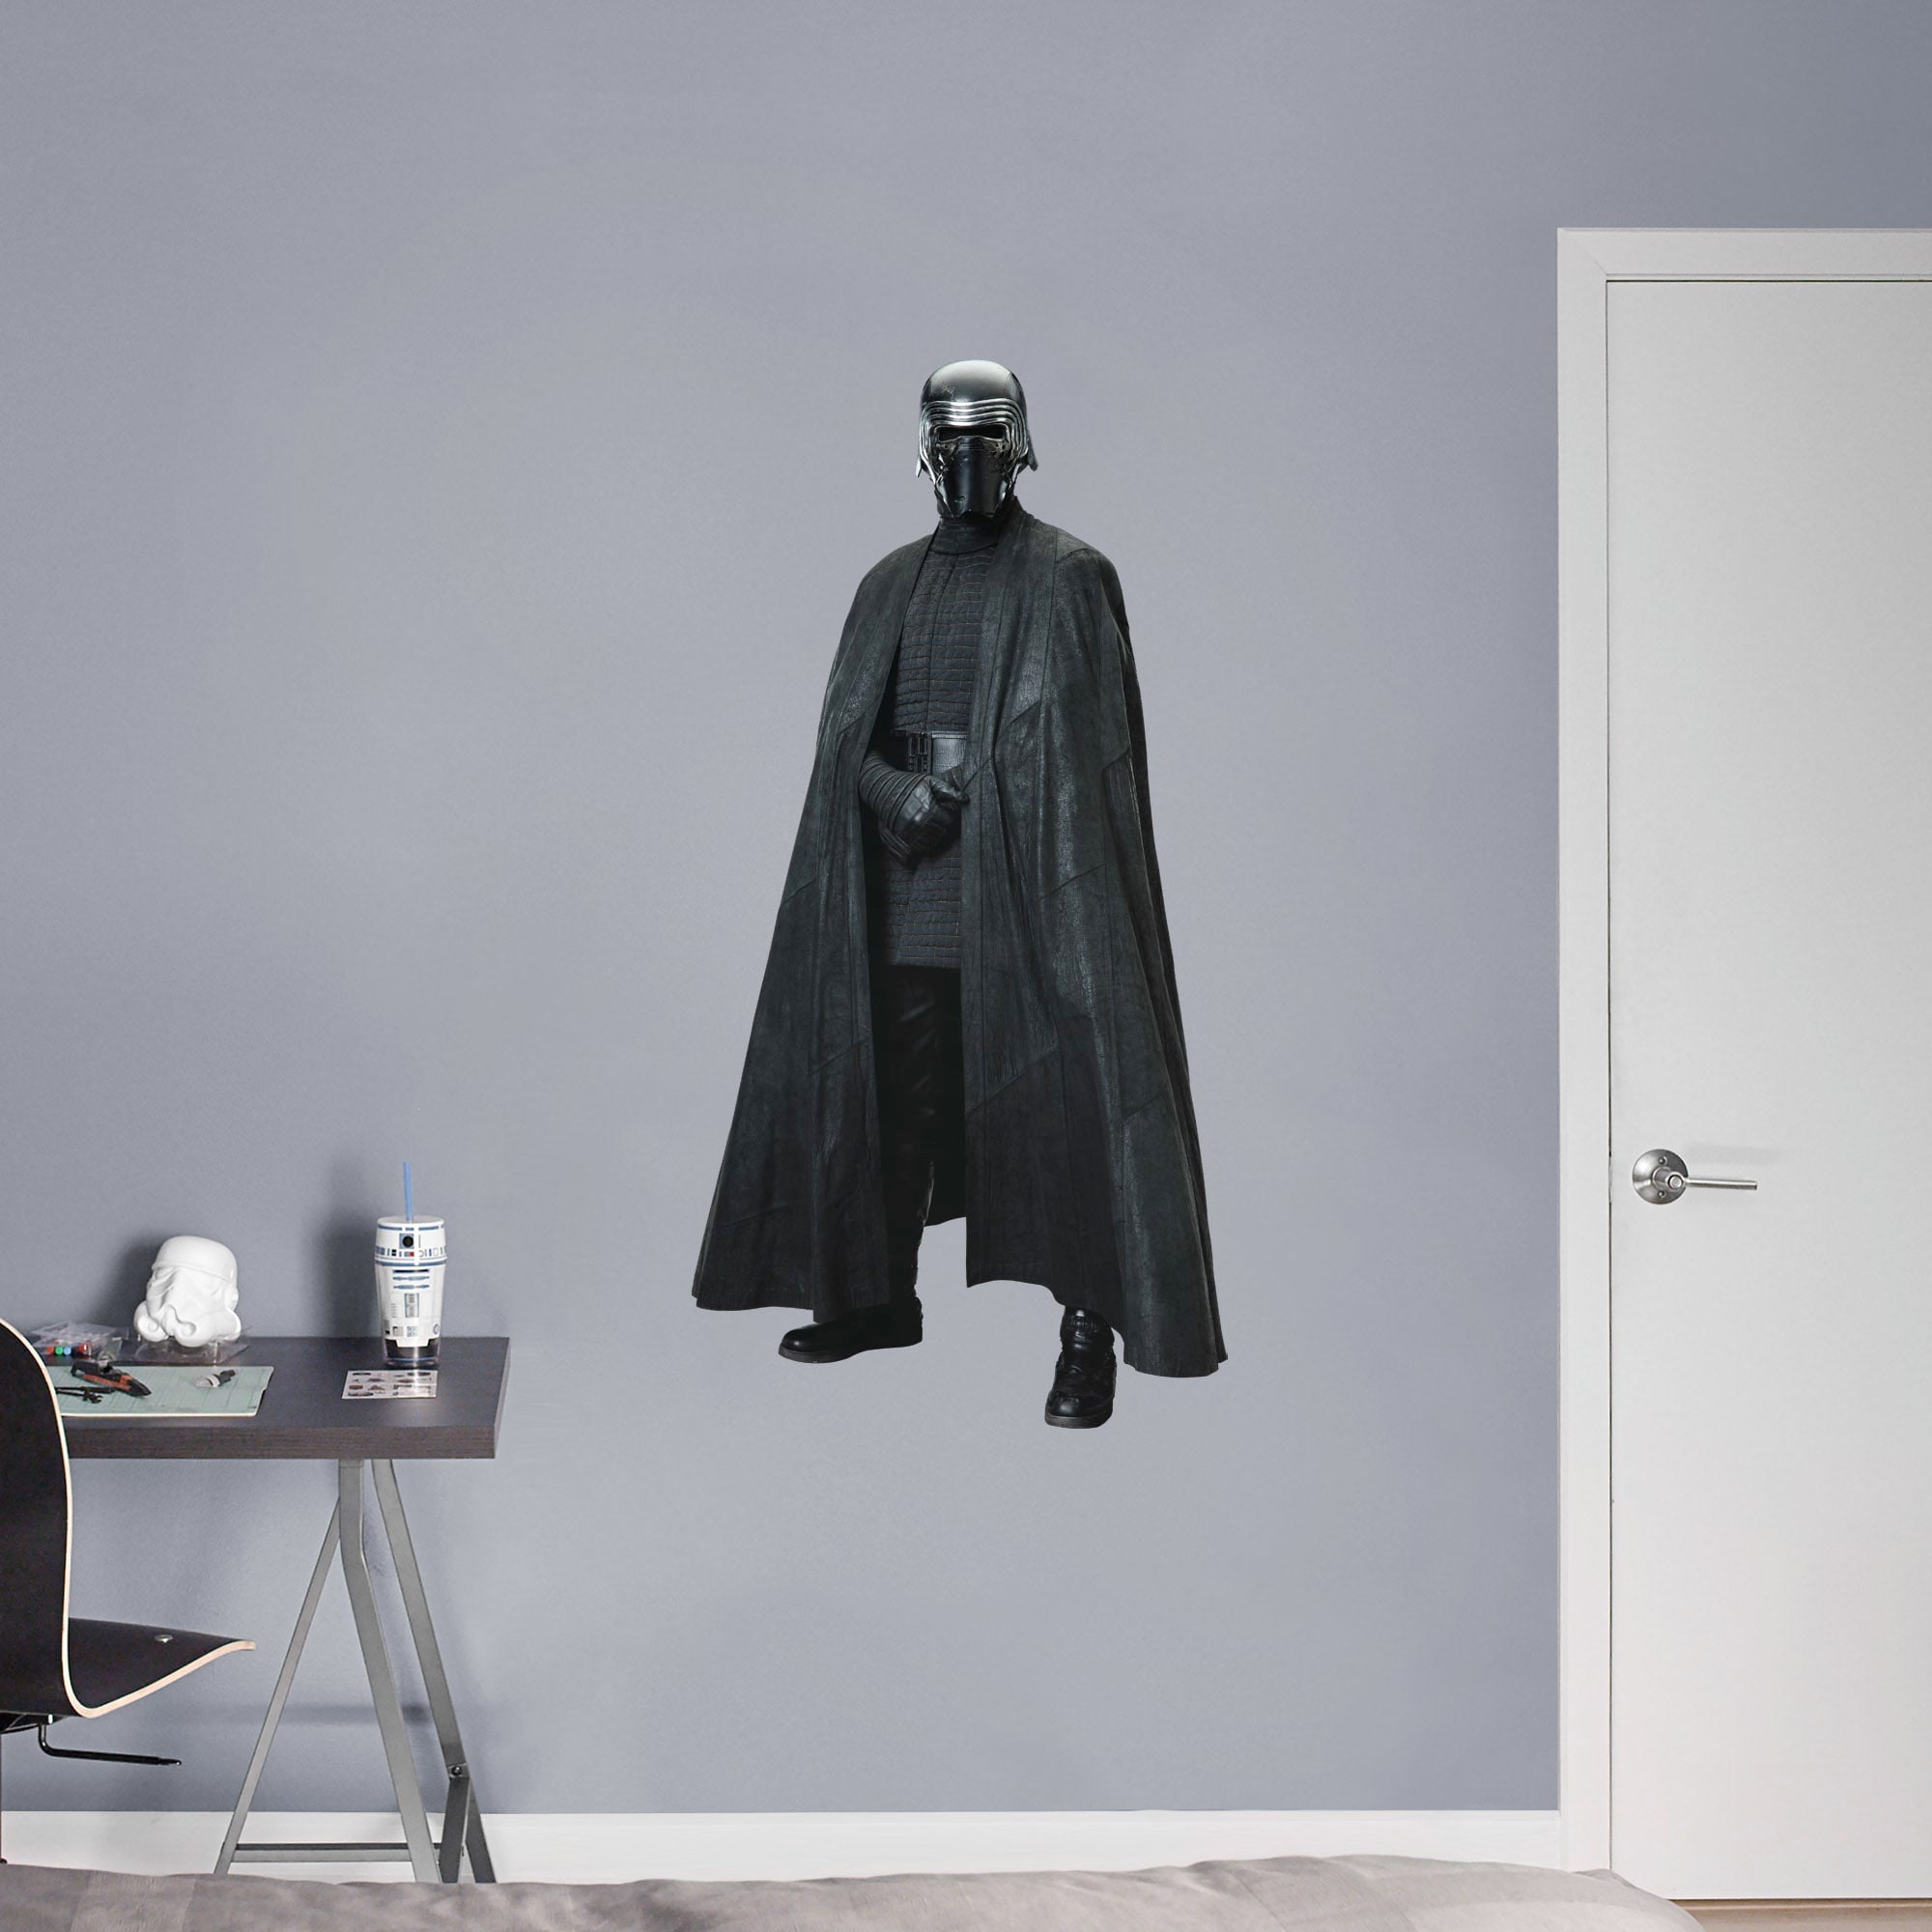 Kylo Ren - Star Wars: The Last Jedi - Officially Licensed Removable Wall Decal Giant Character + 2 Decals (26"W x 51"H) by Fathe